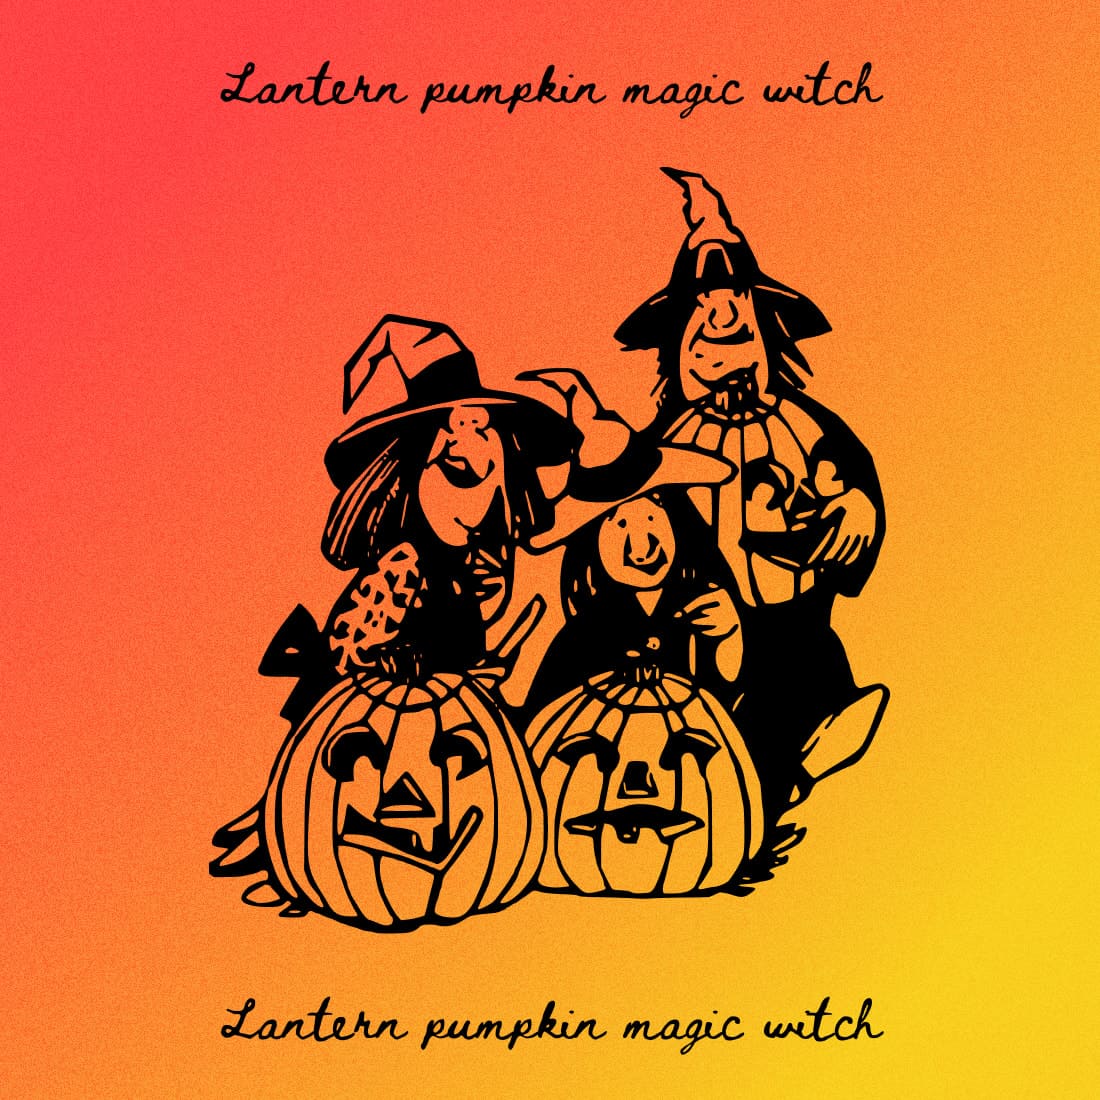 Lantern Pumpkin Magic Witch - Bright Colorful Example.